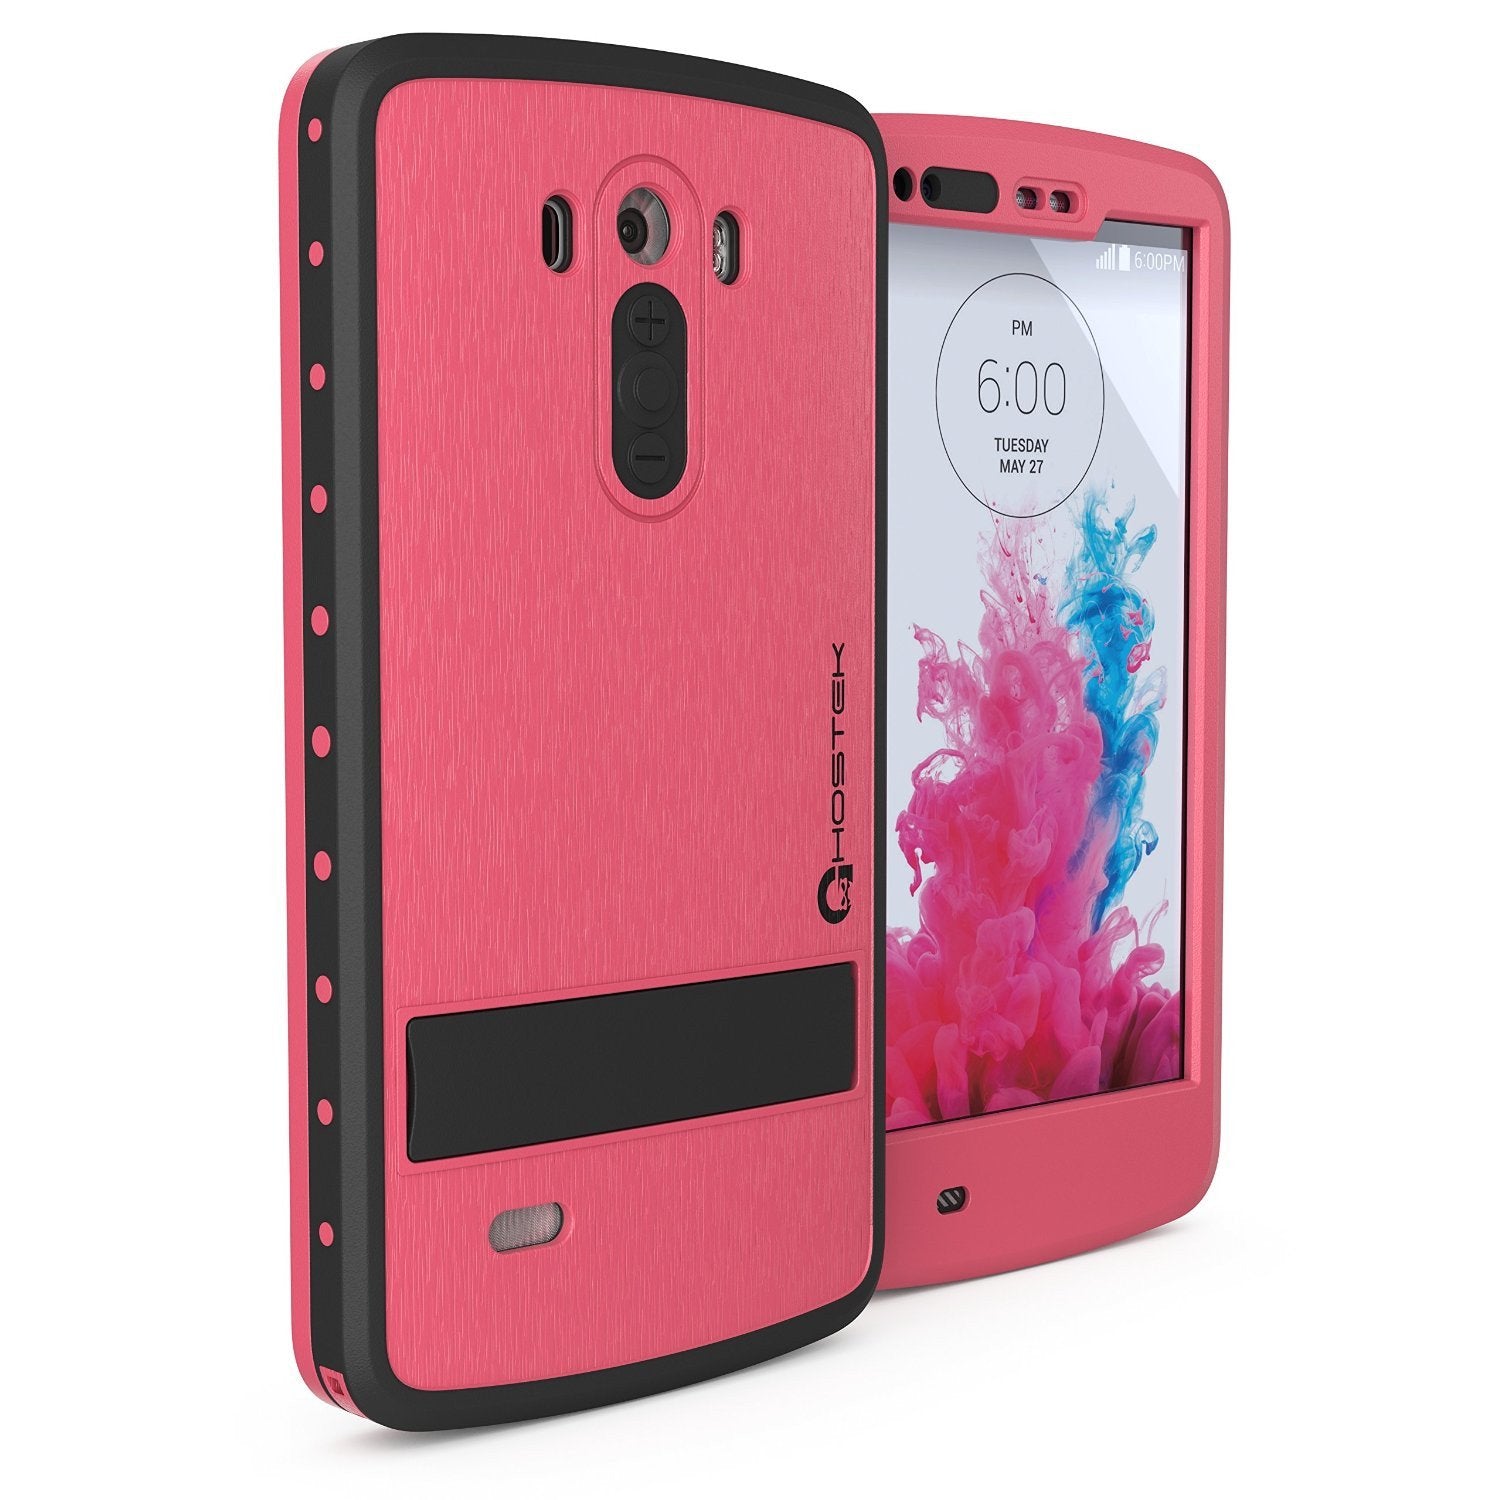 LG G3 Waterproof Case, Ghostek Atomic Pink W/ Attached Screen Protector Slim Fitted  LG G3